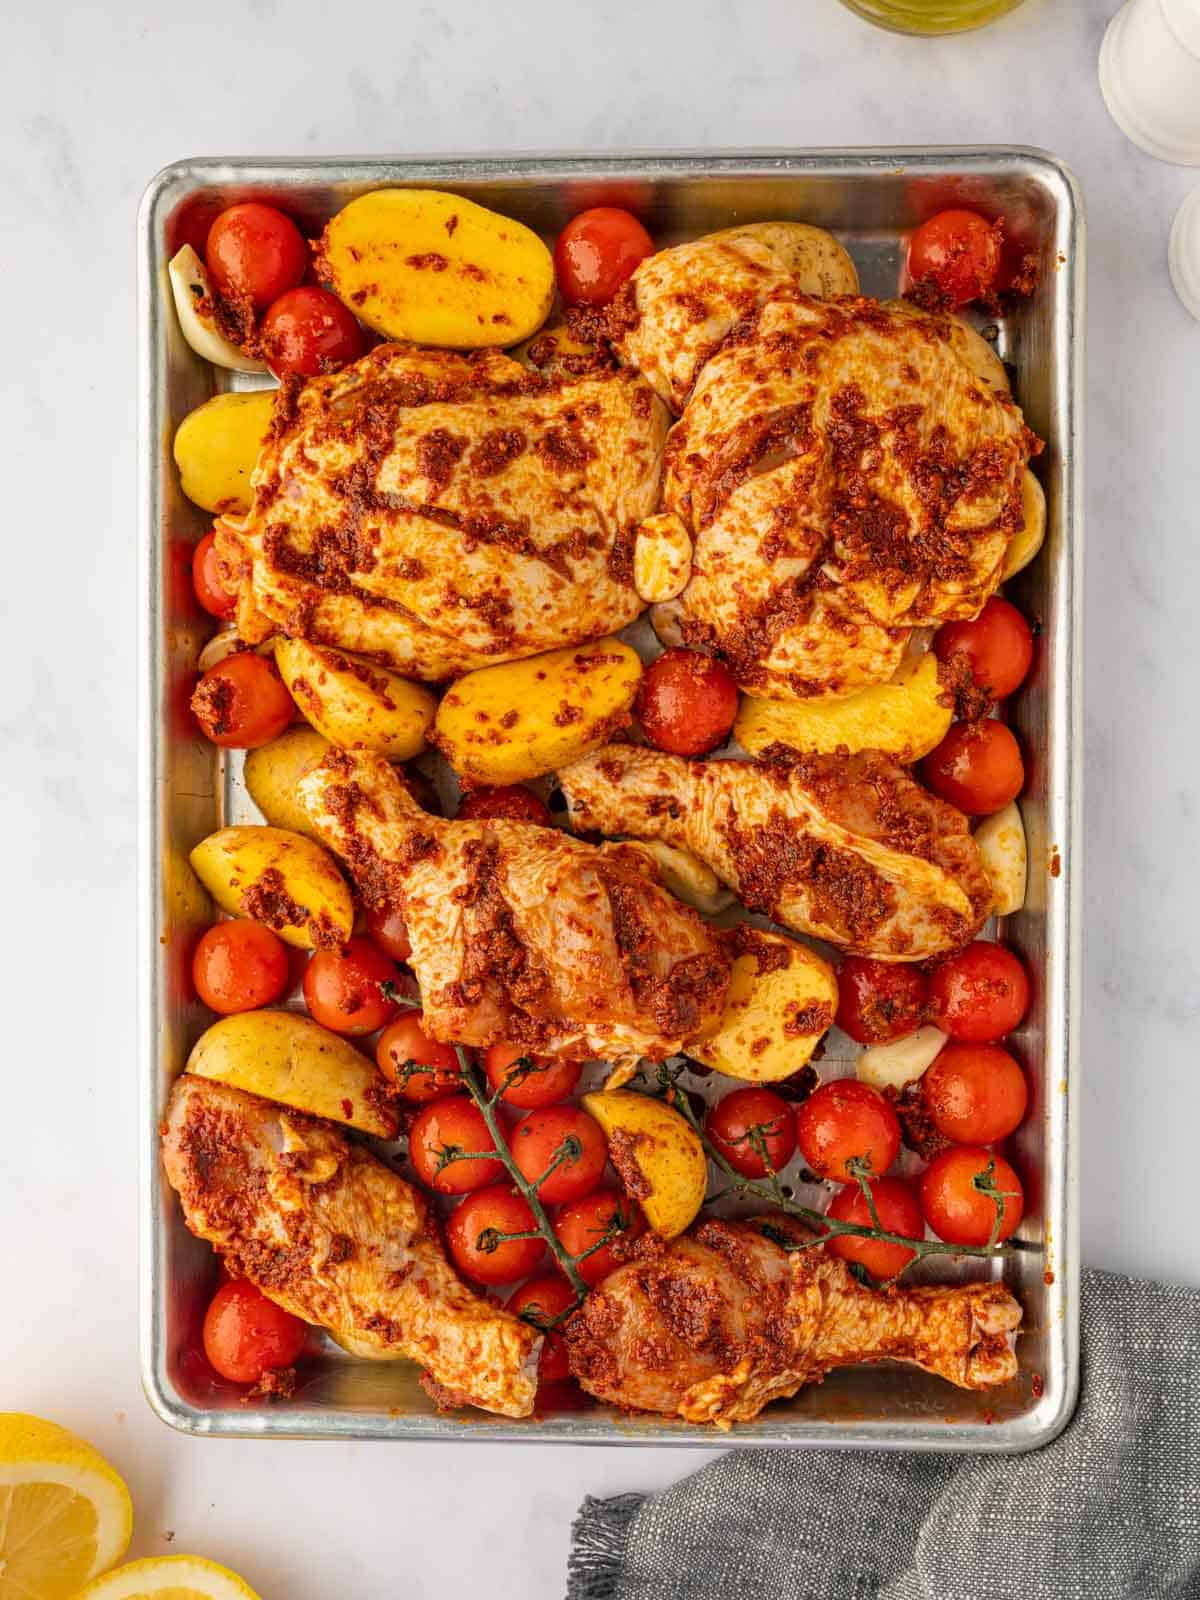 Harissa marinated chicken on a sheetpan with tomatoes and potatoes.